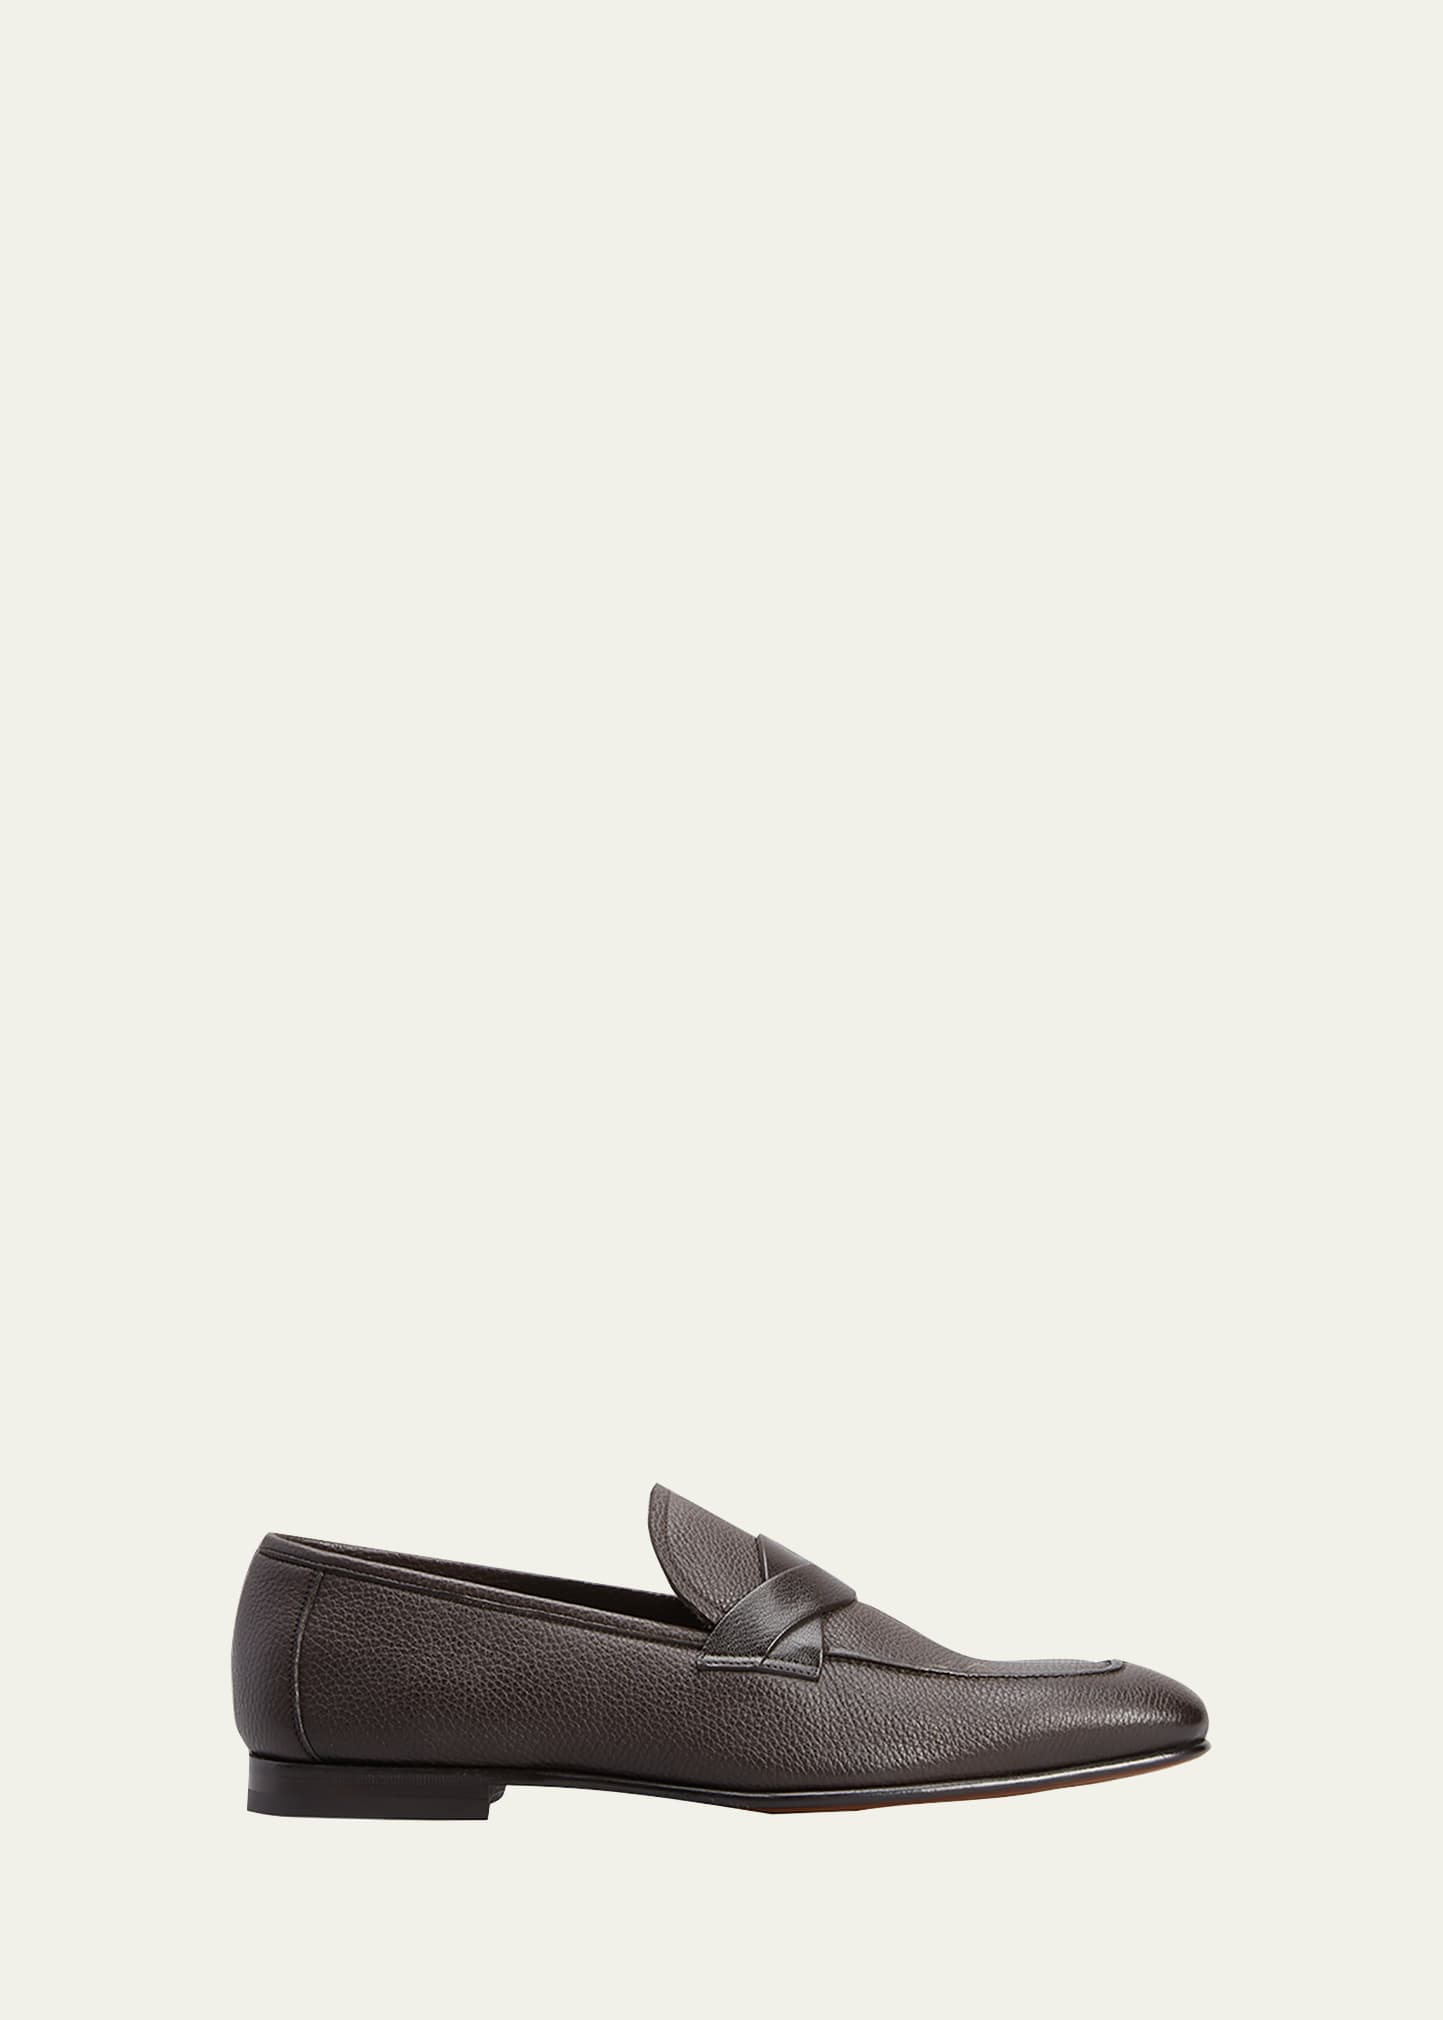 TOM FORD MEN'S SEAN GRAIN LEATHER TWISTED BAND LOAFERS